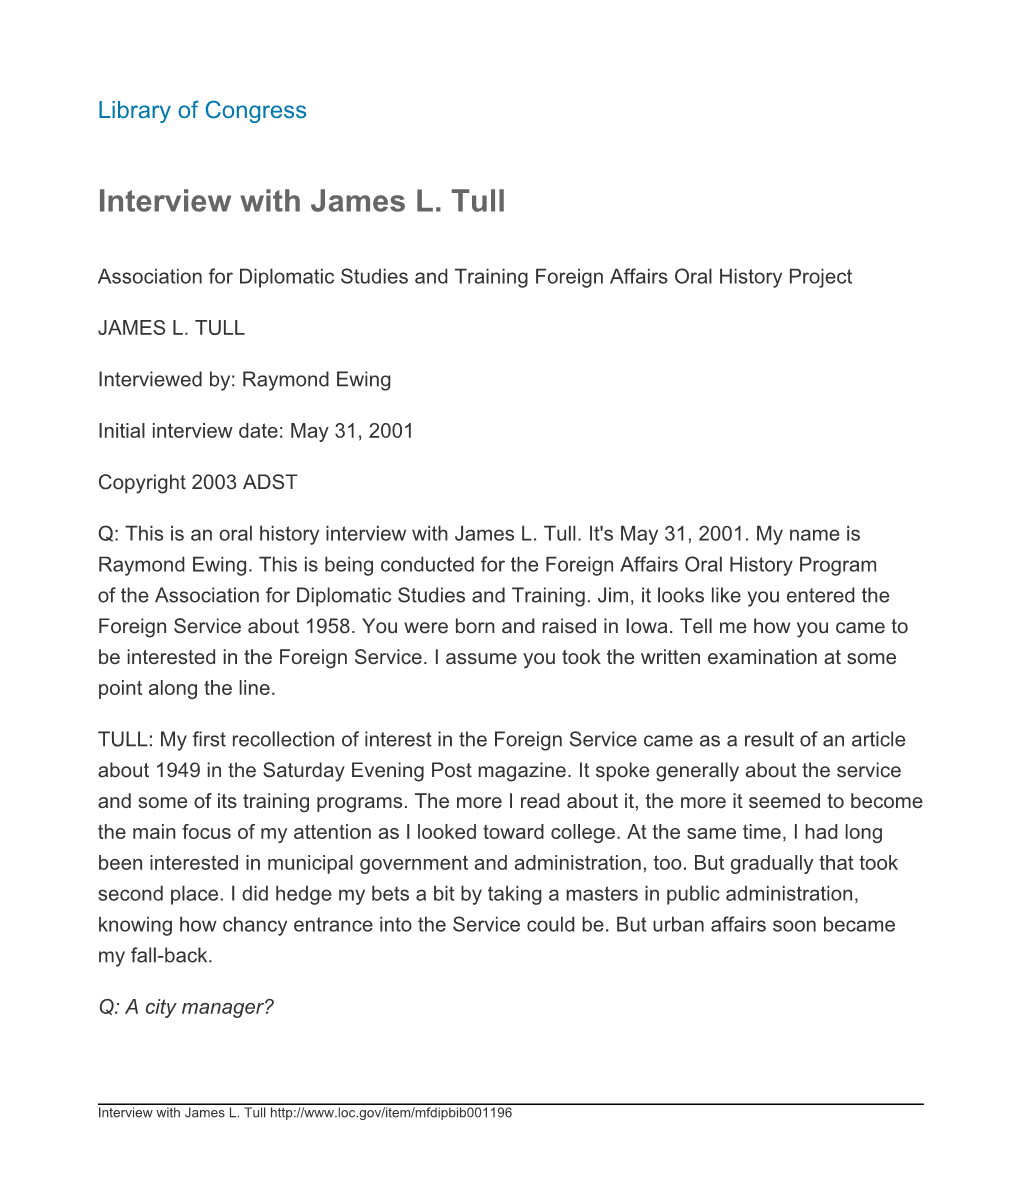 Interview with James L. Tull